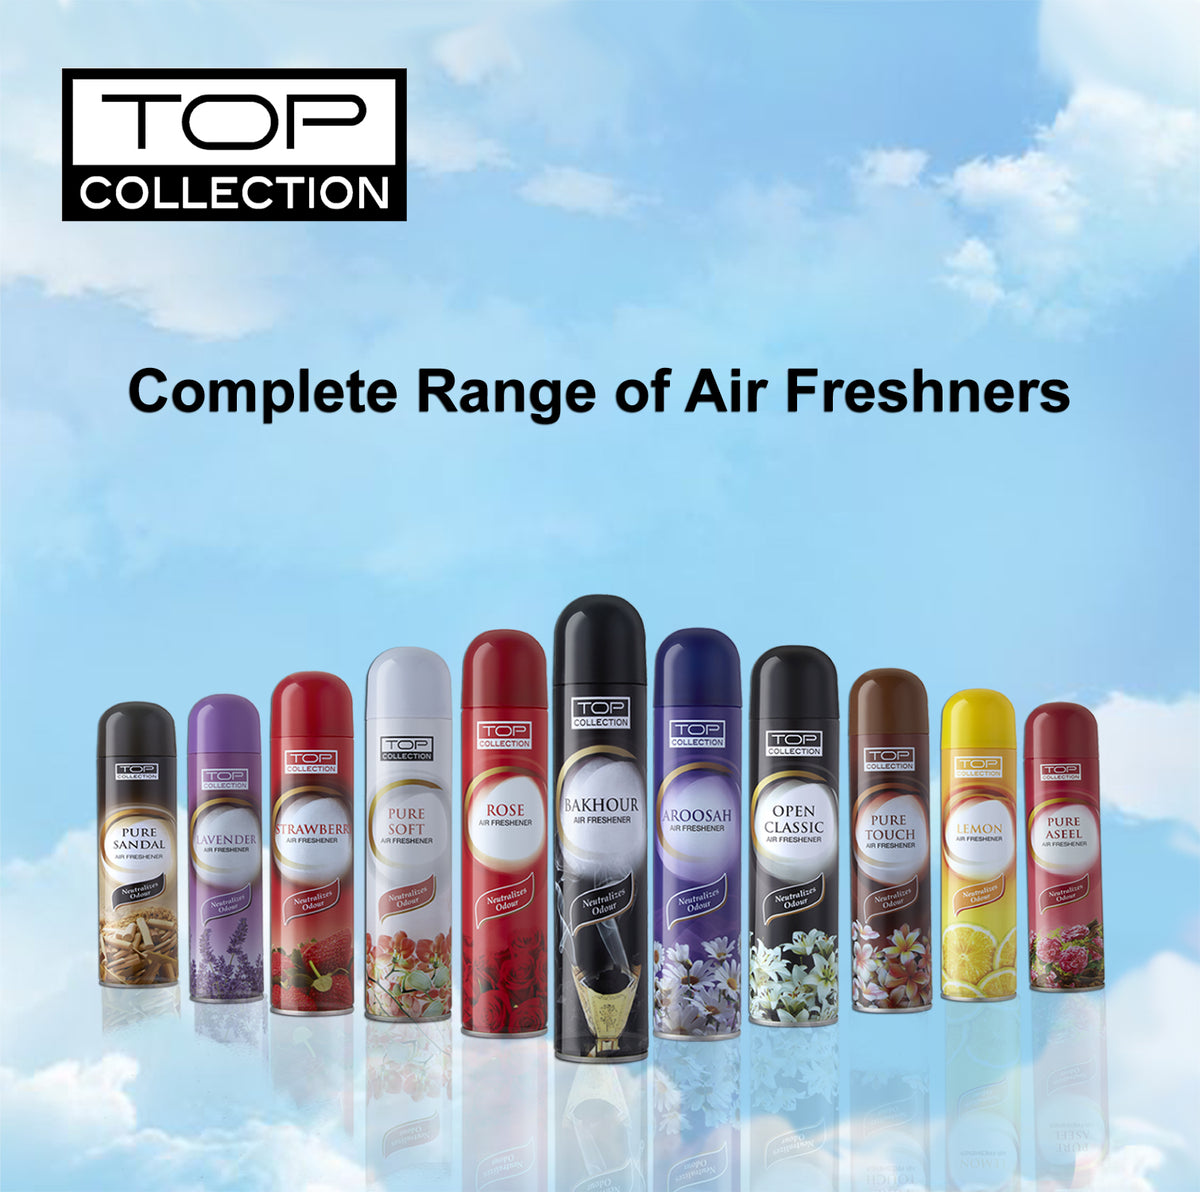 Top Collection Air Freshener - Bakhour, 300ml